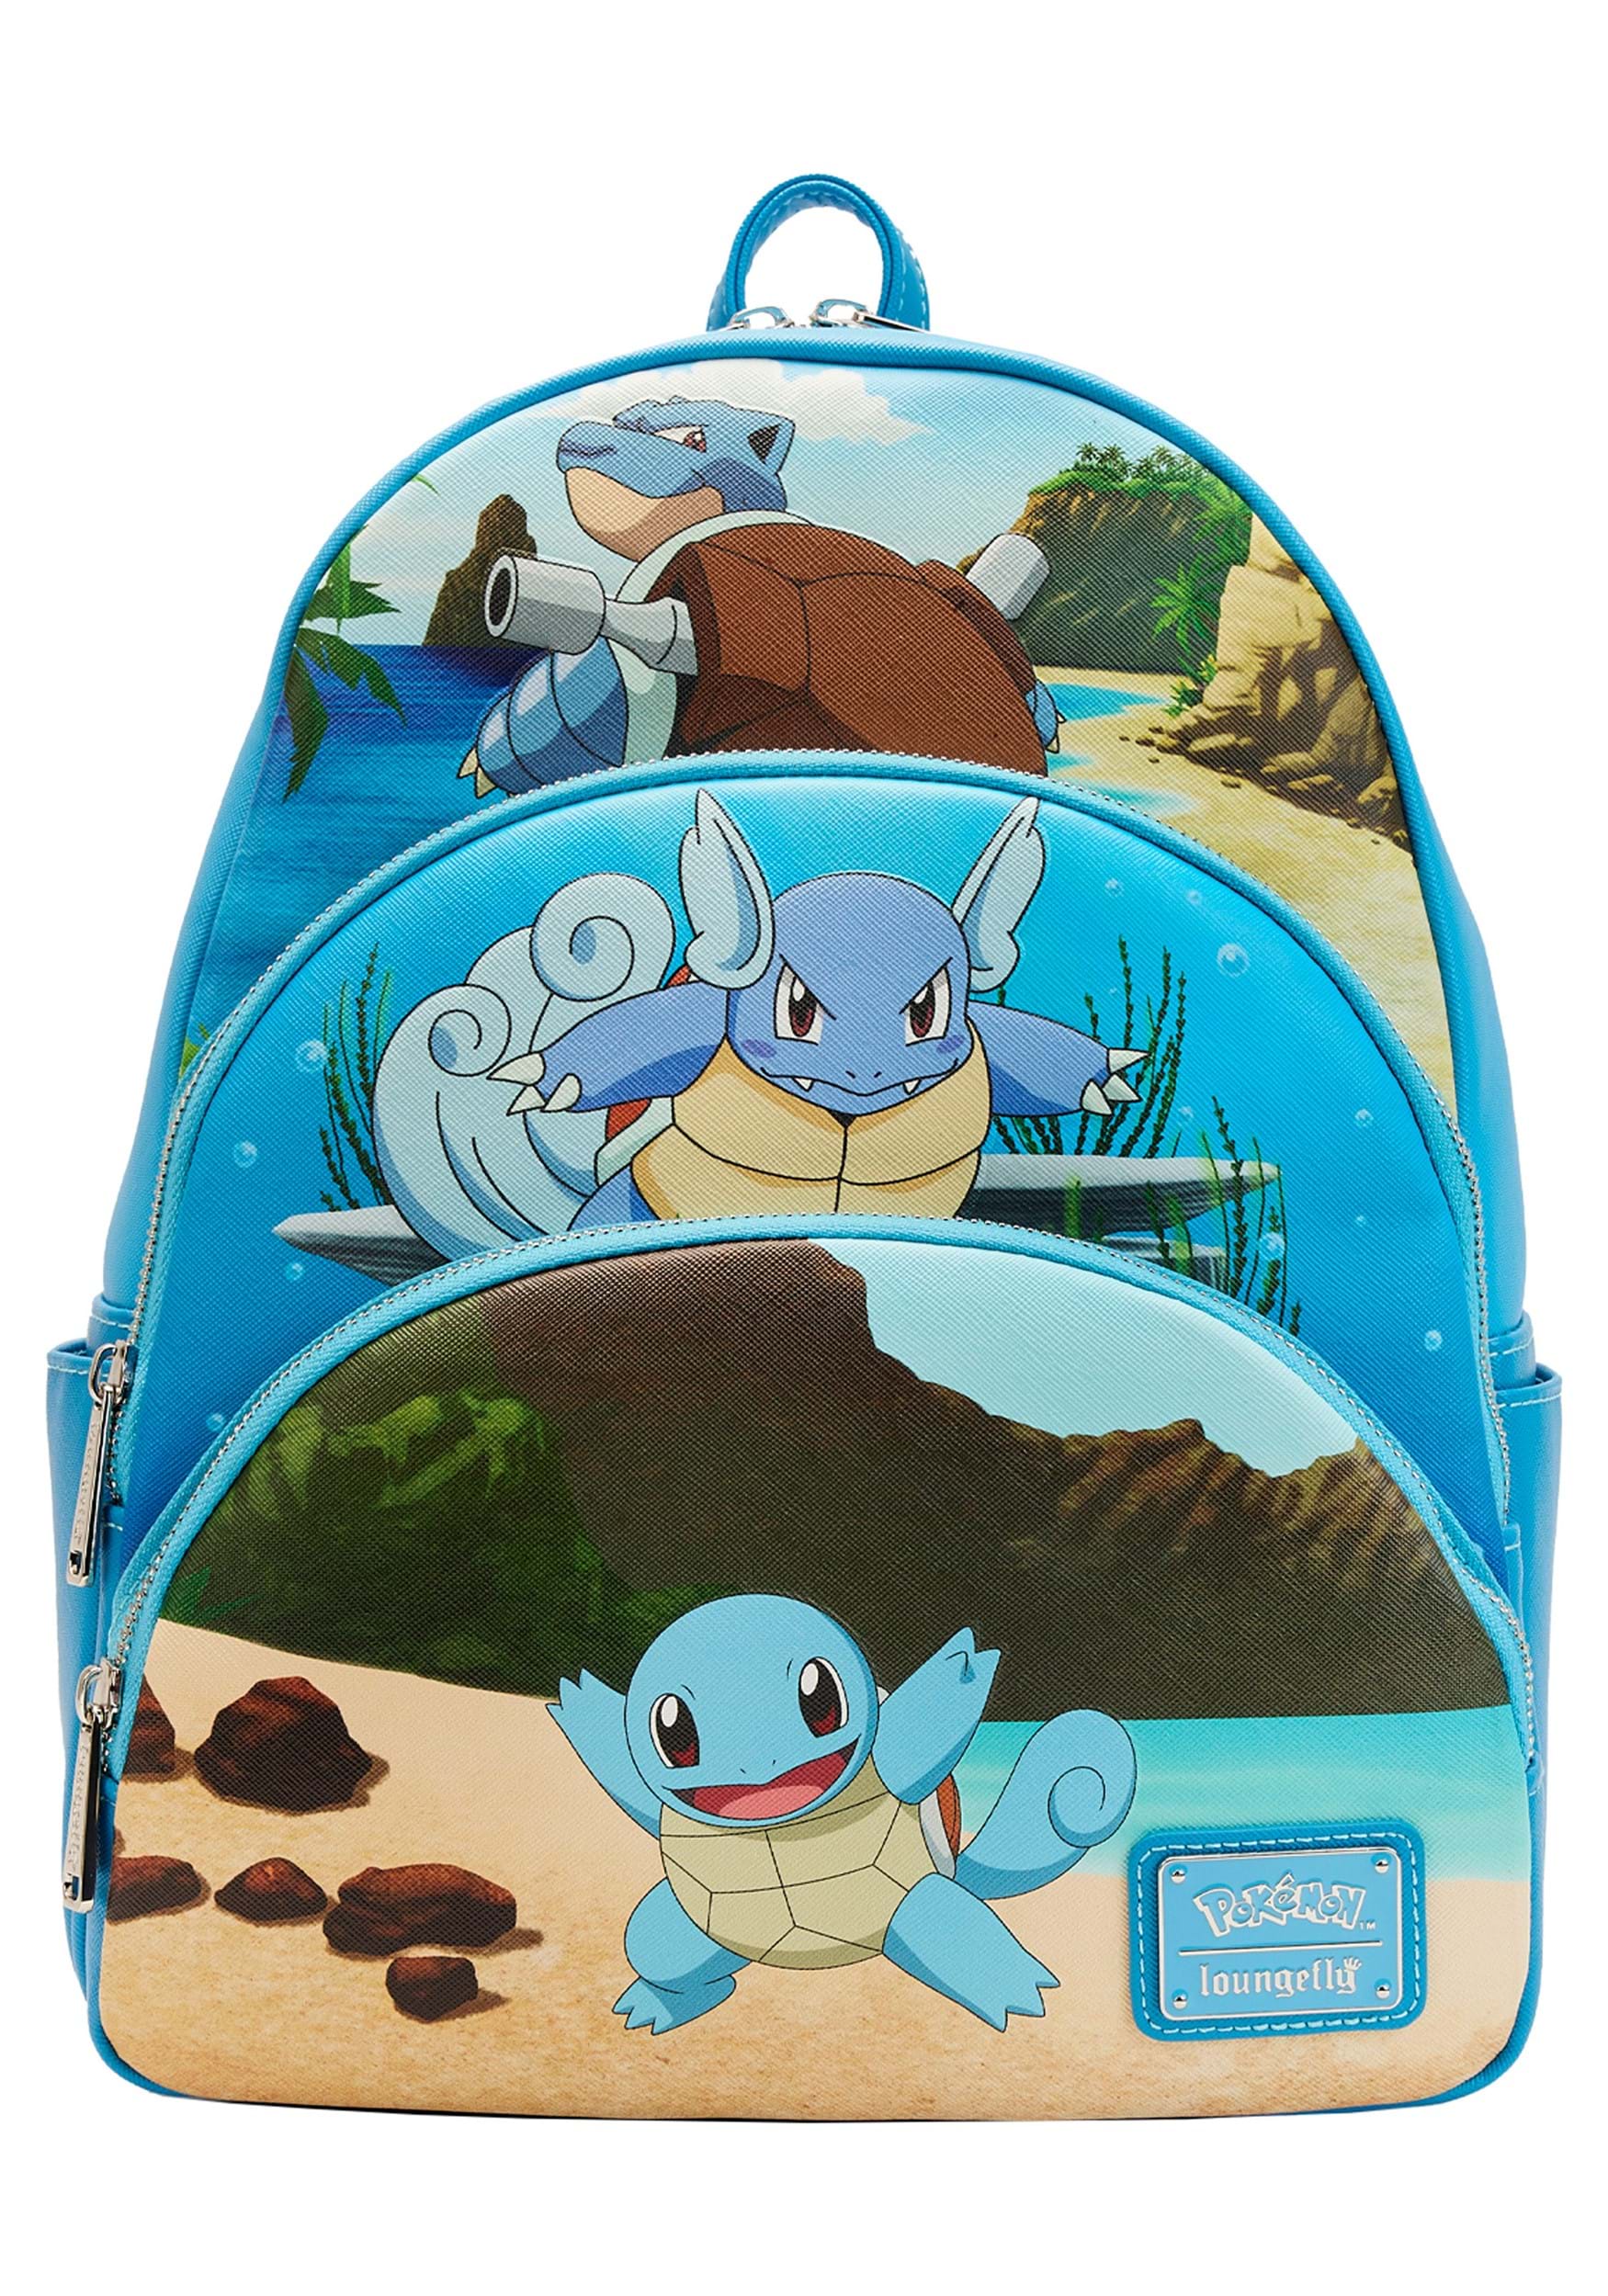 Pokémon Squirtle Evolution Triple Pocket Backpack by Loungefly